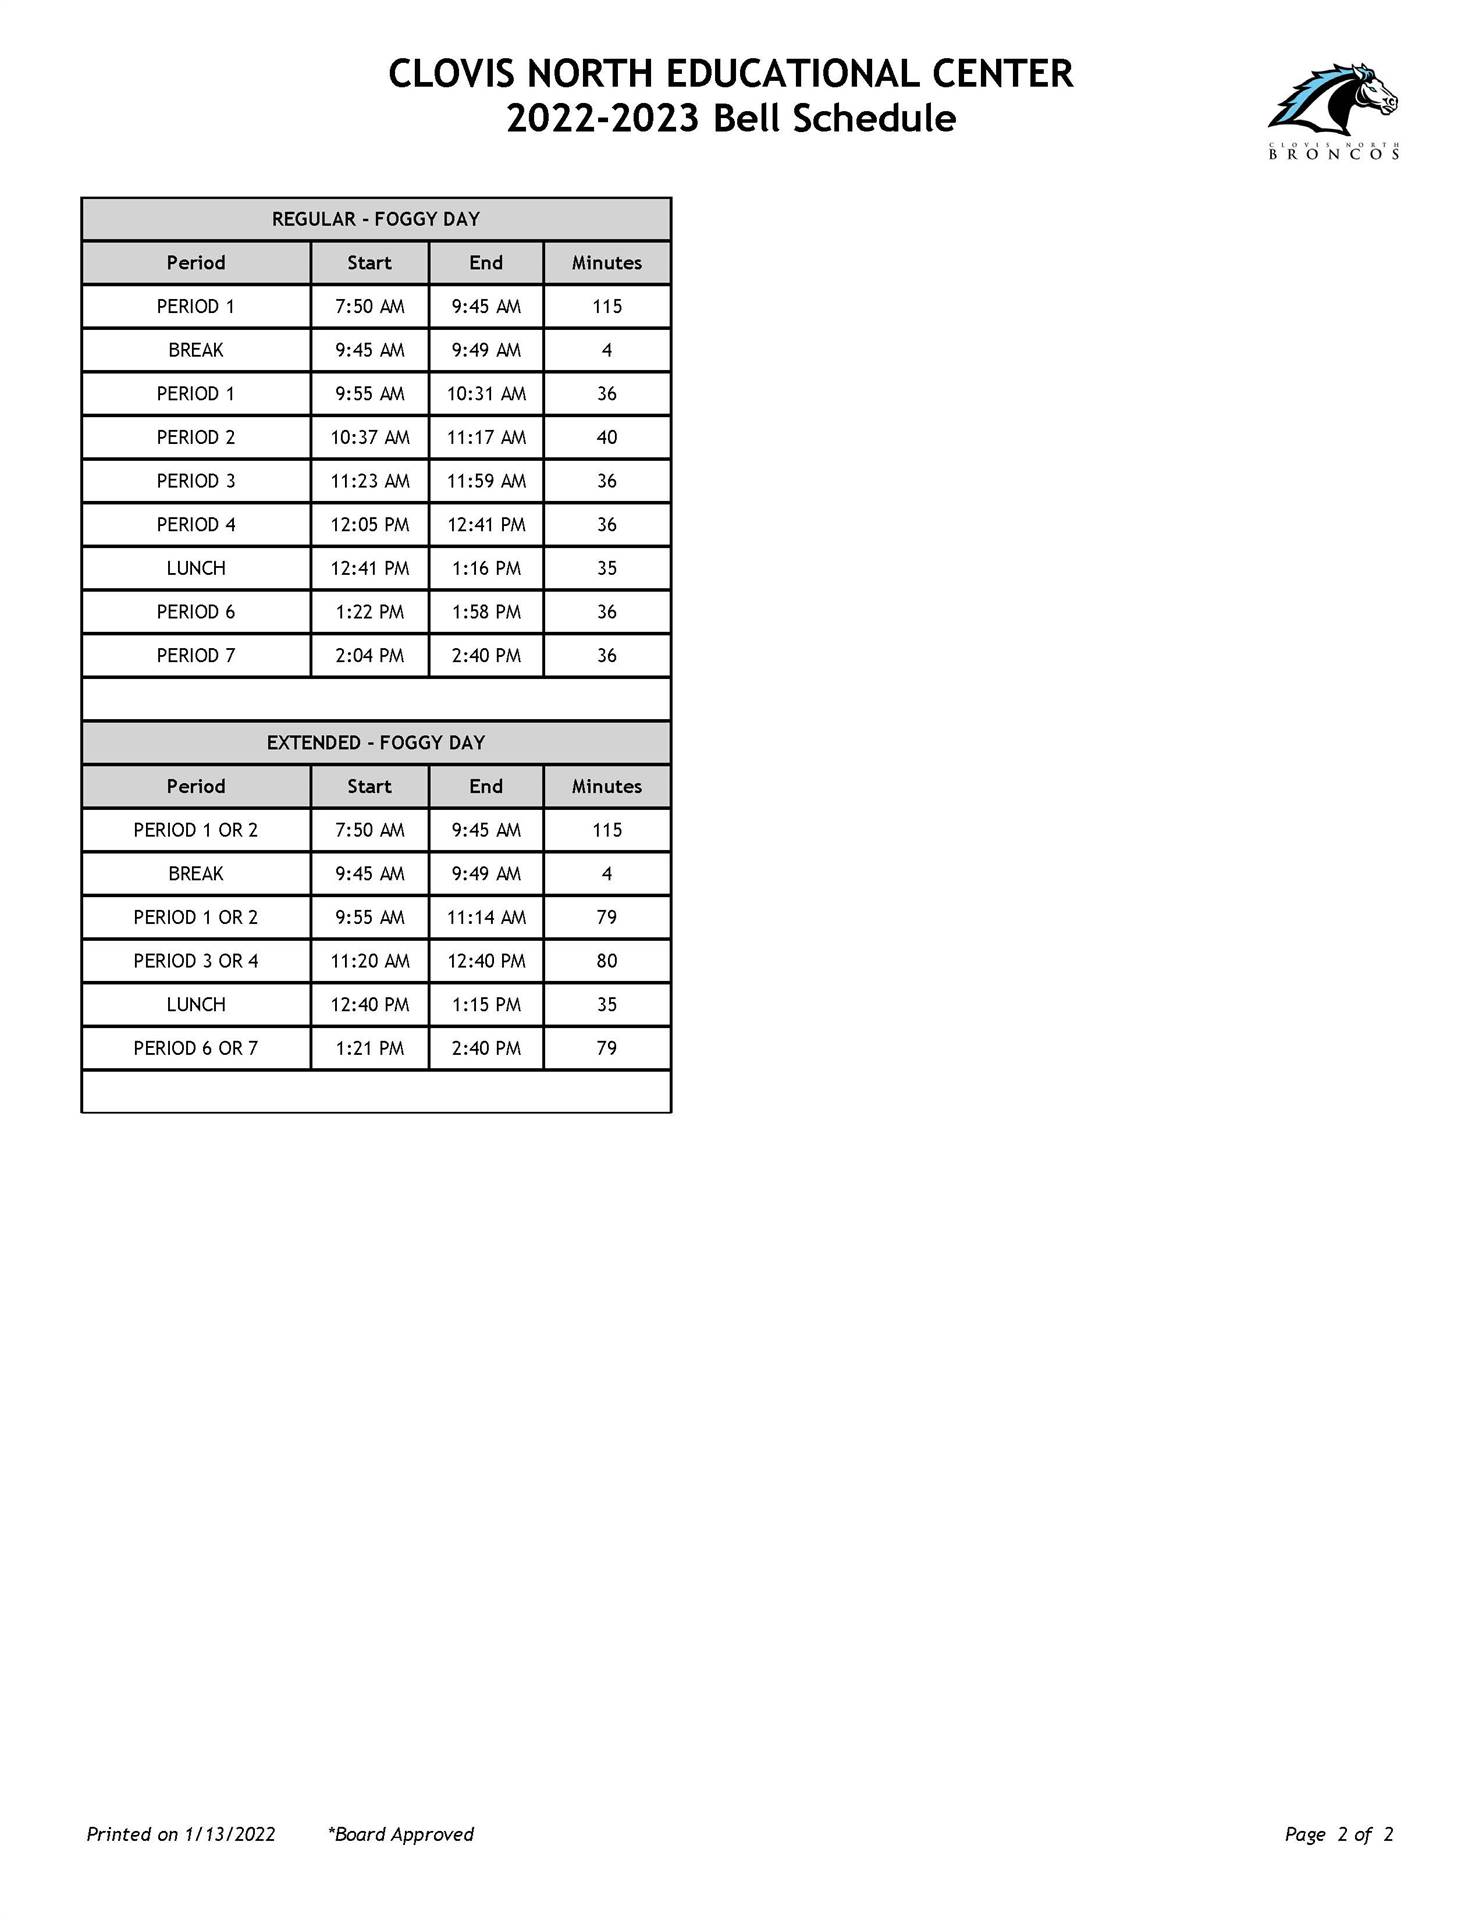 CNHS Area Bell Schedule - full text downloadable below